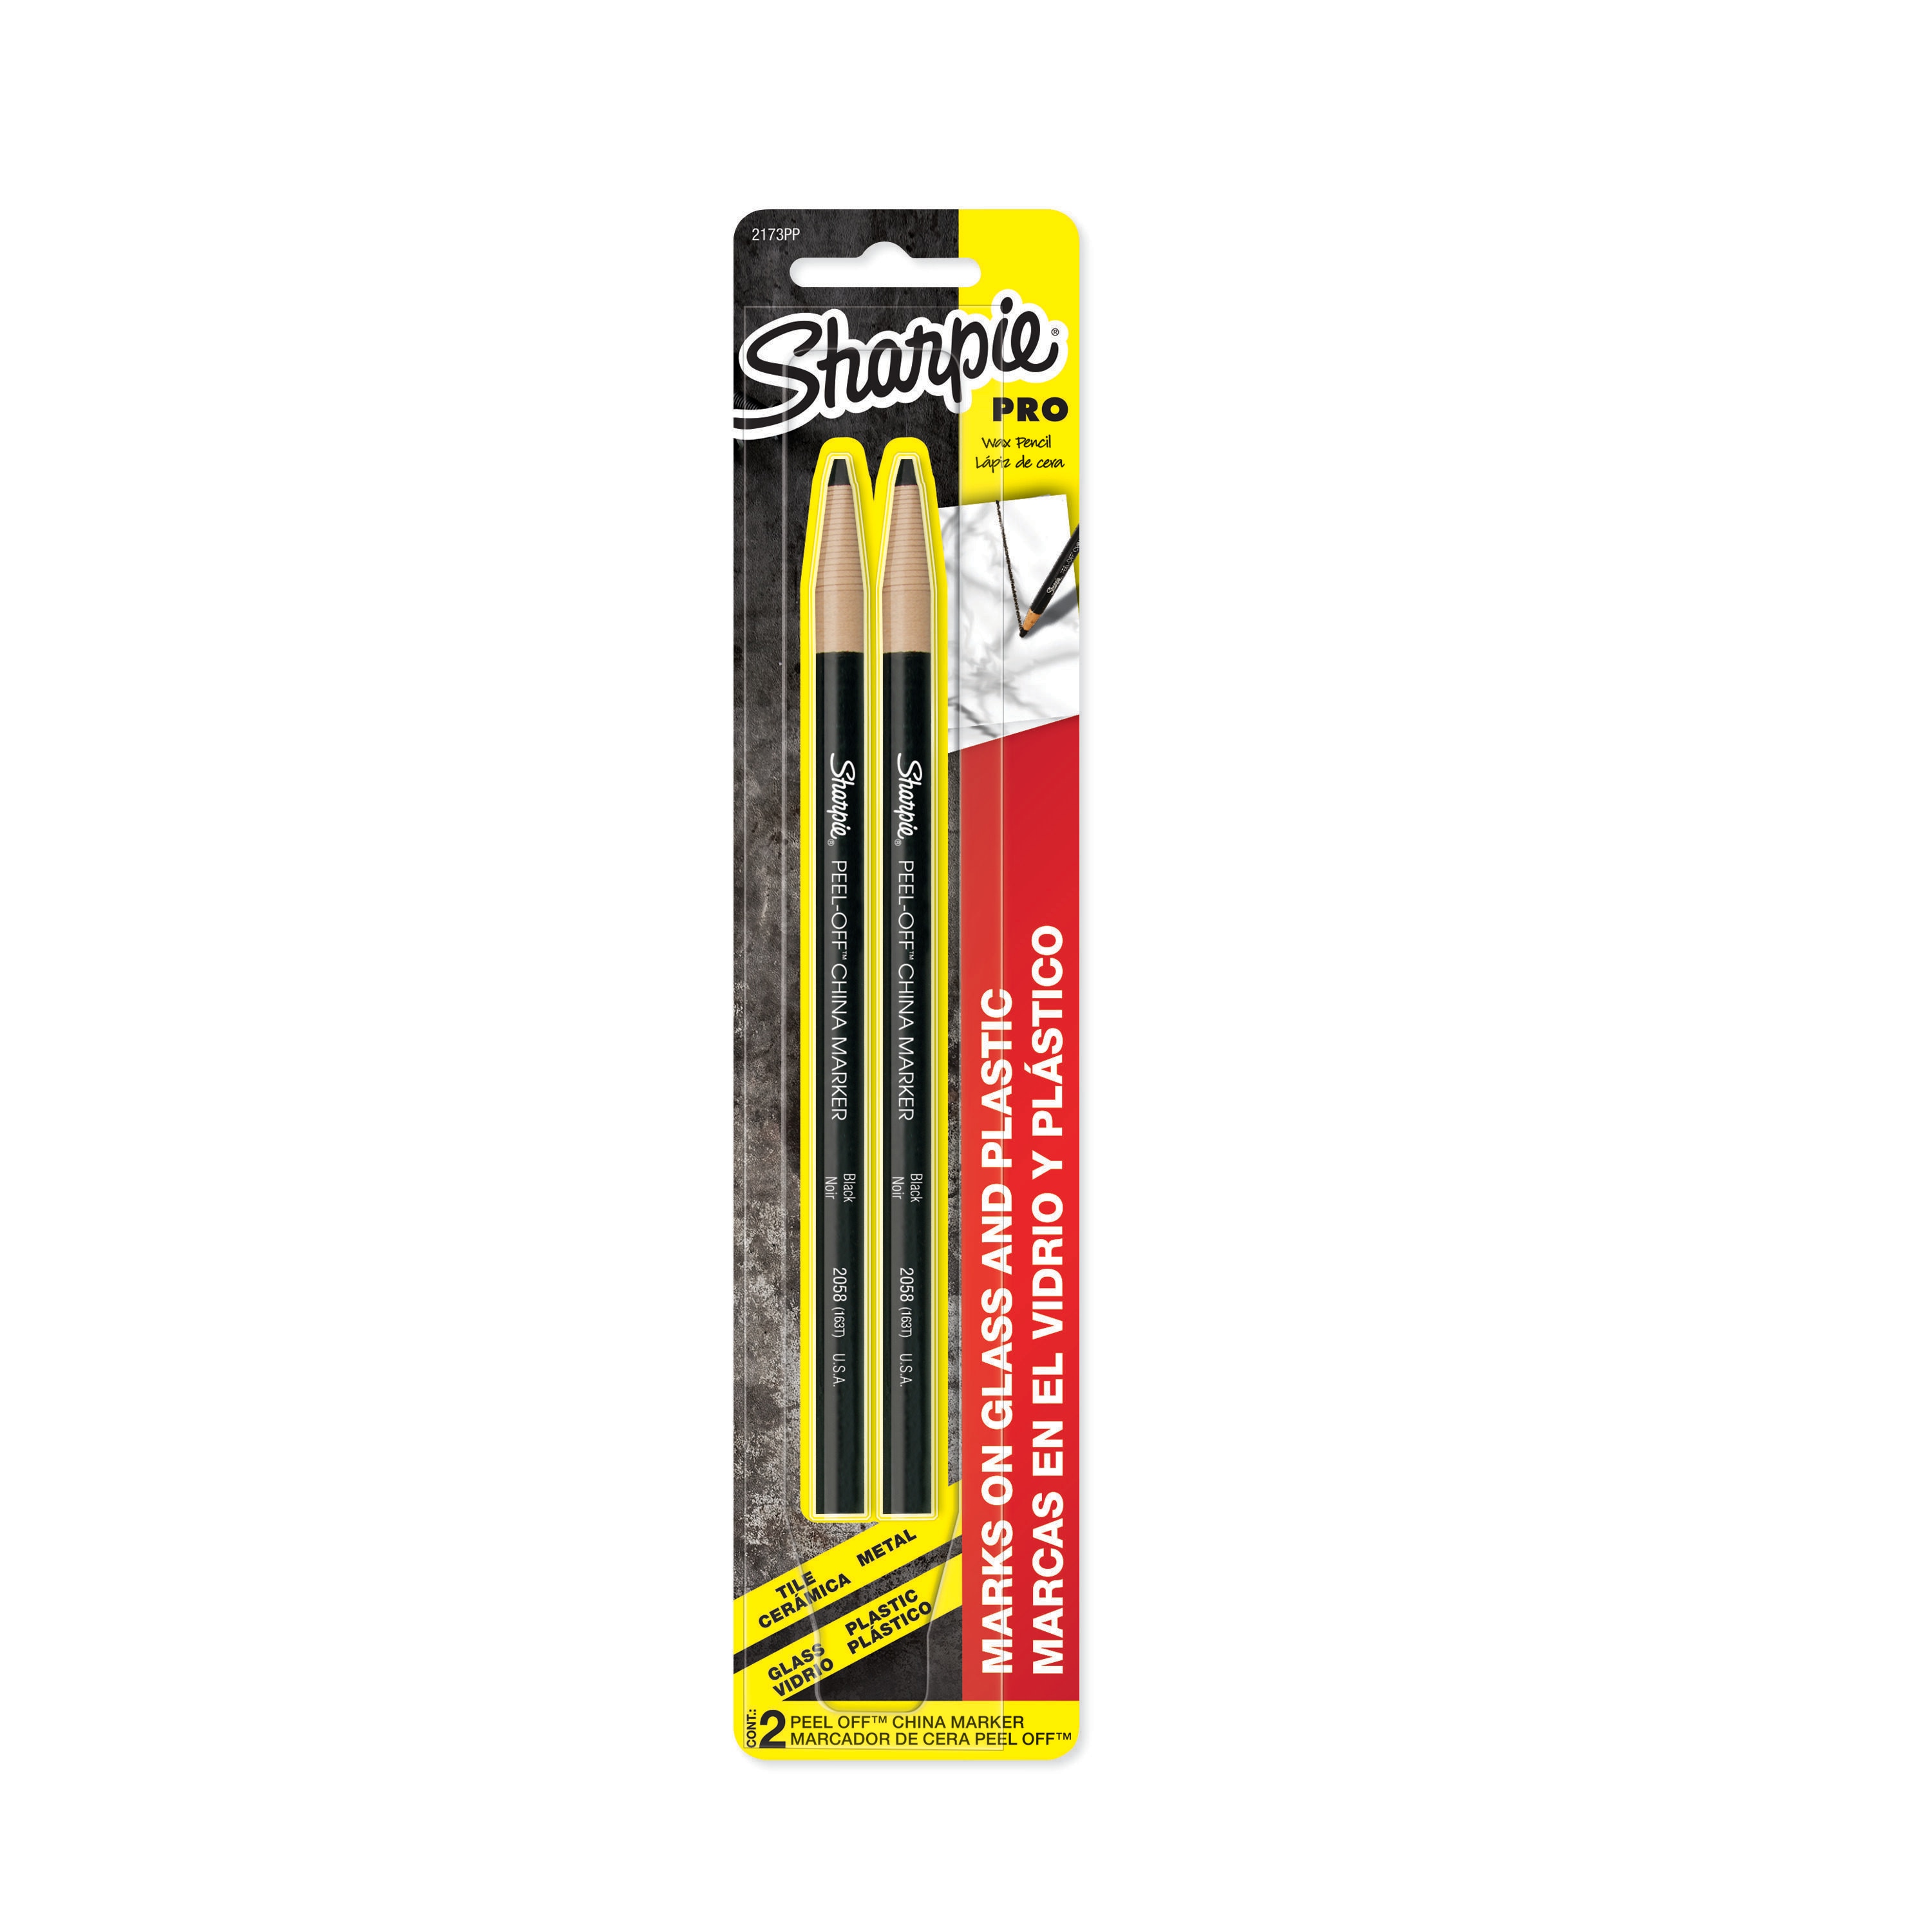 Sharpie 2-Pack Ultra Fine Point Black Permanent Marker in the Writing  Utensils department at